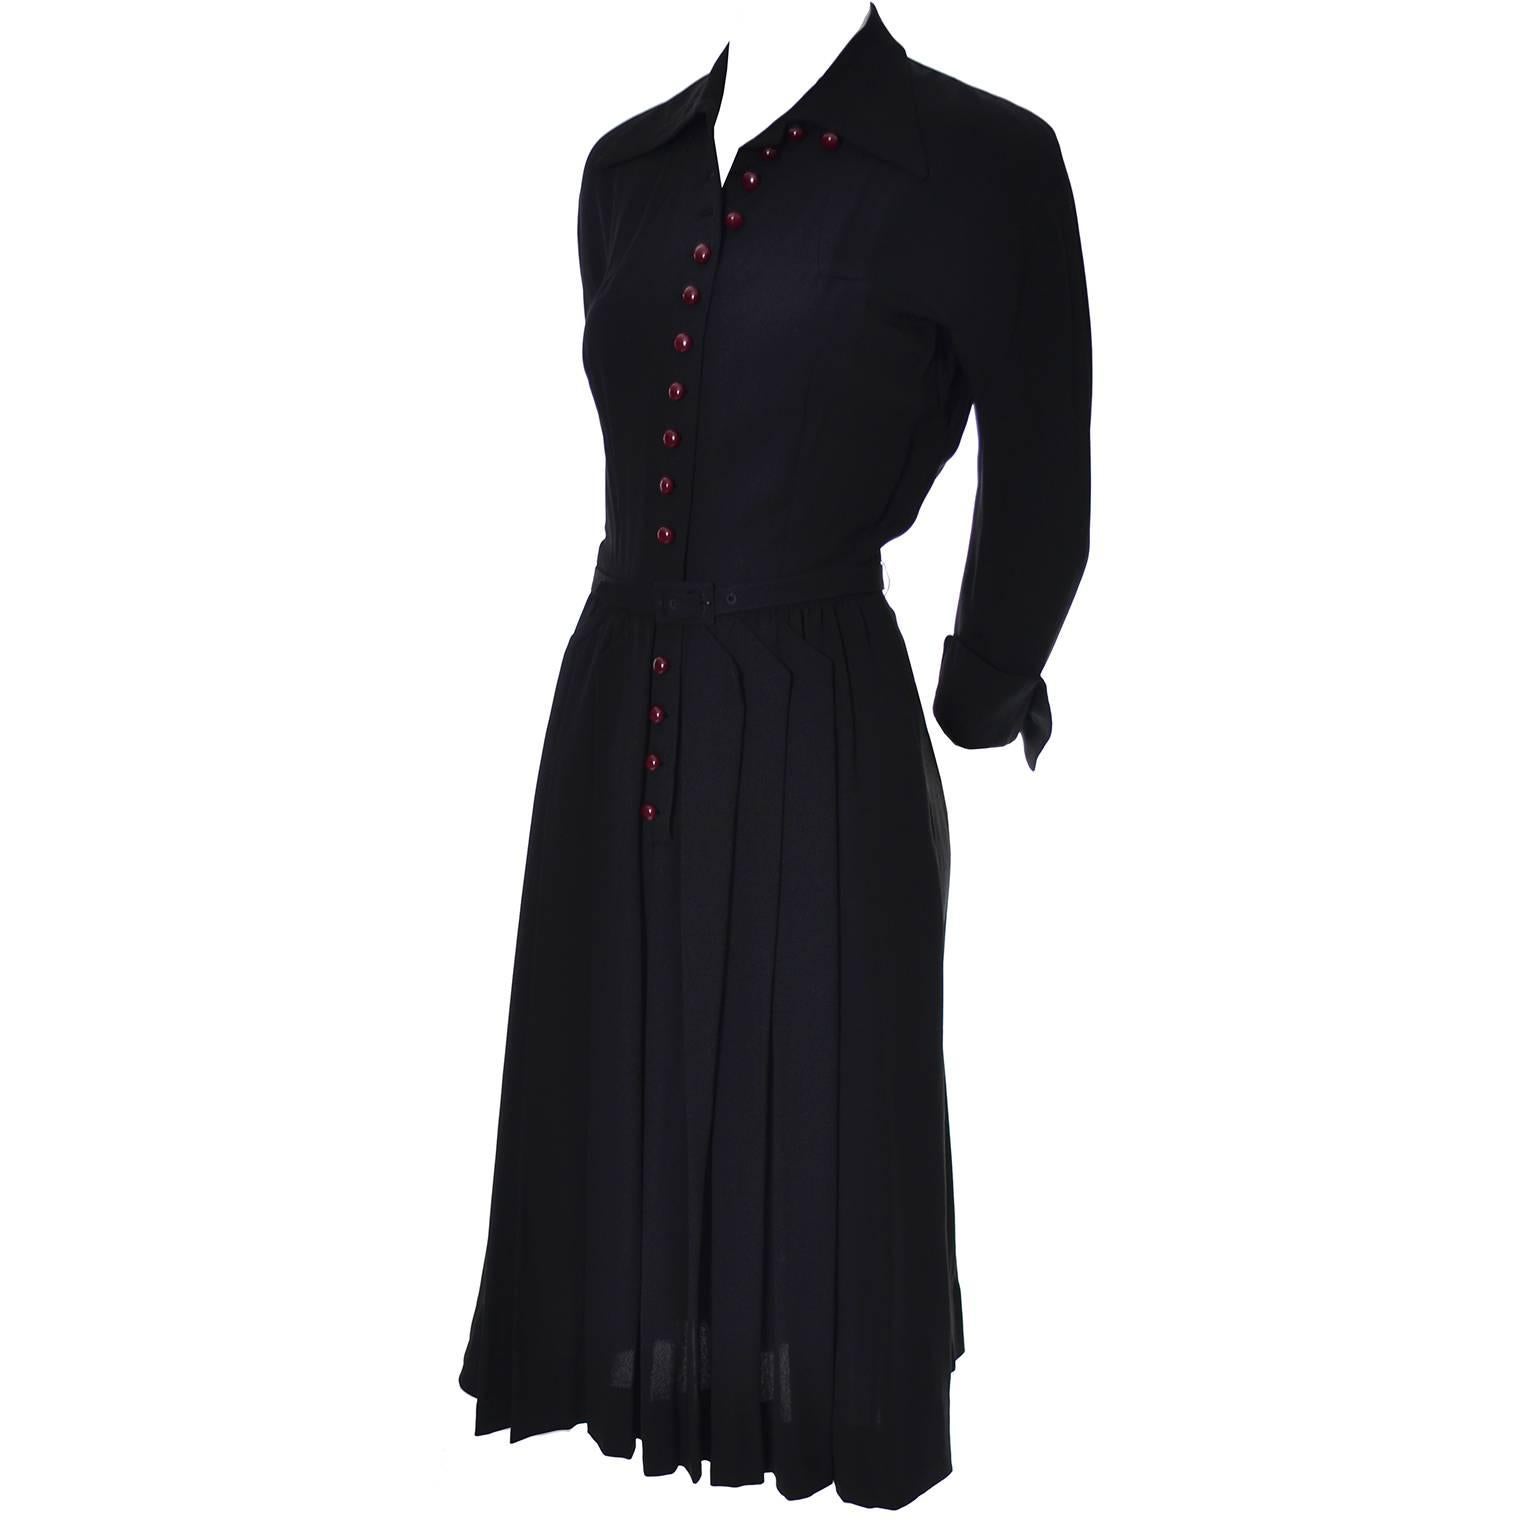 1940s Early Adele Simpson Vintage Rayon Crepe Dress With Unique Details 2